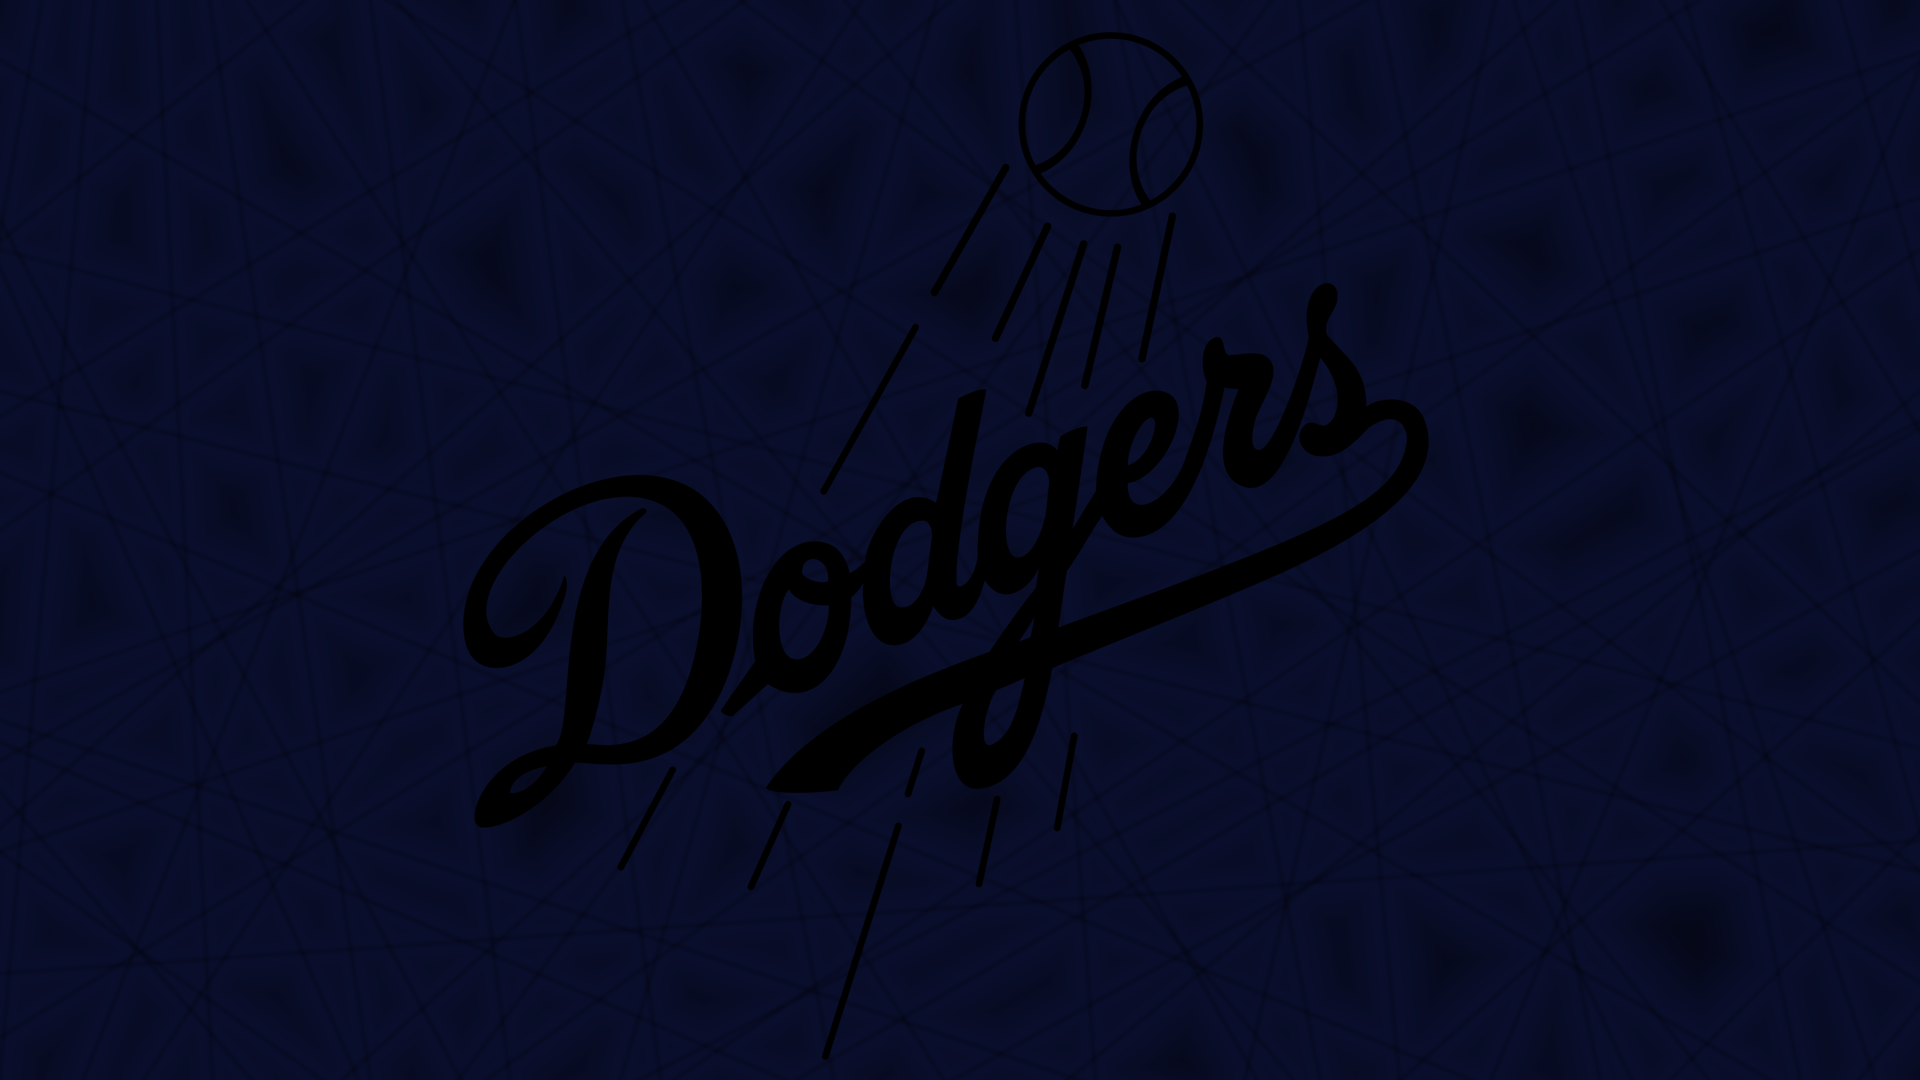  Los Angeles Dodgers or even videos related to Los Angeles Dodgers